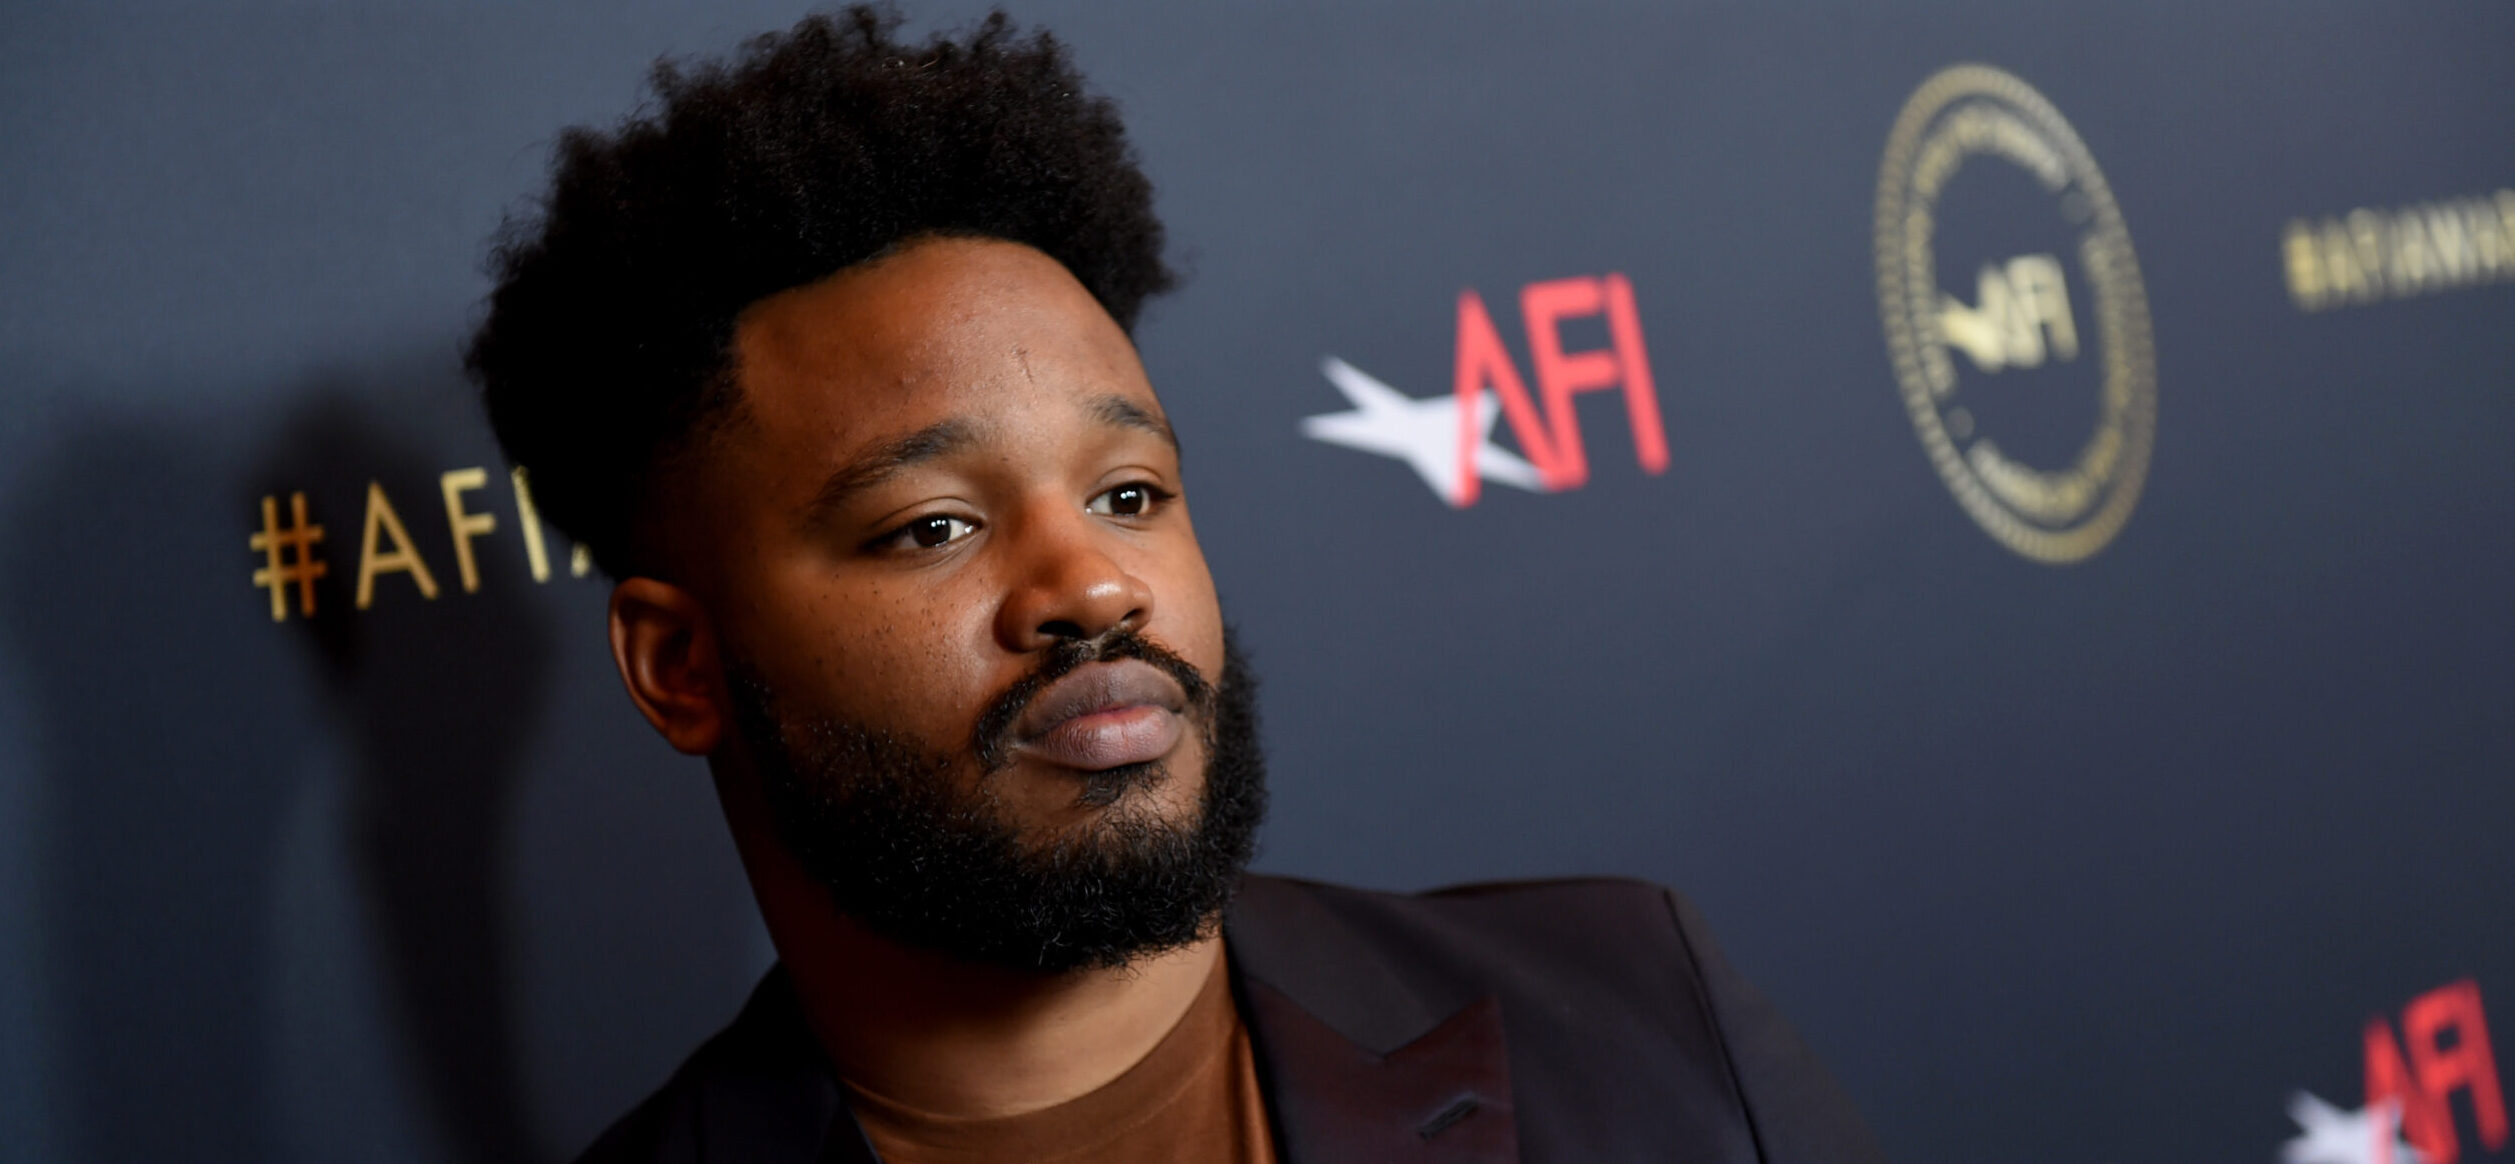 911 Call Reveals Ryan Coogler Showed ID At Bank – The Teller Didn’t Check It